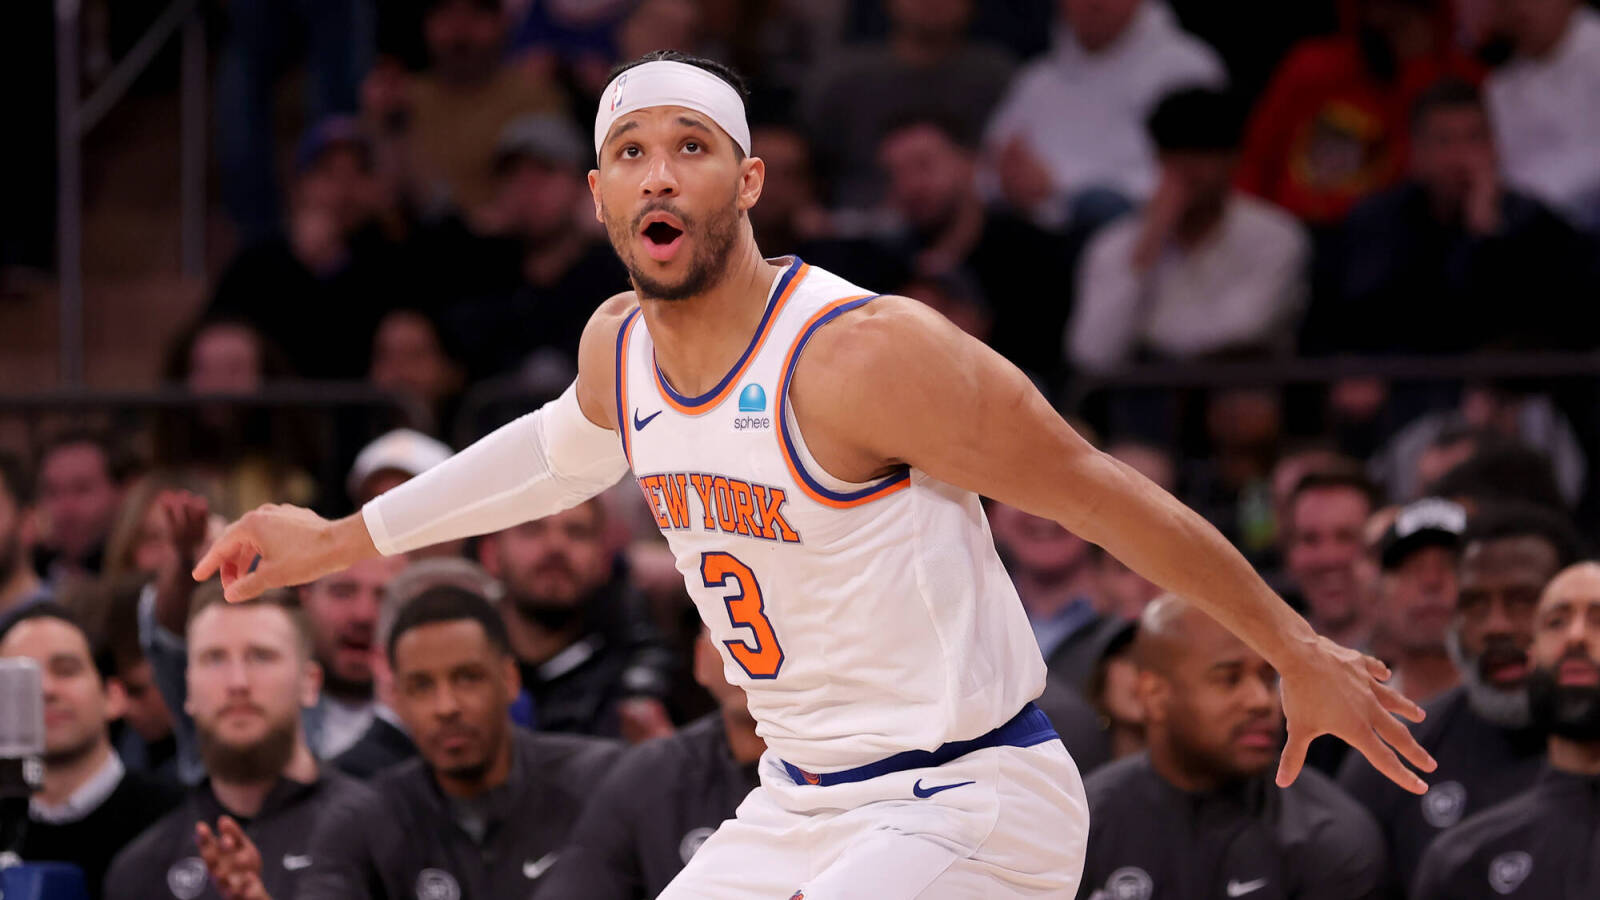 Knicks' Josh Hart expected Sixers to 'disrespect' him